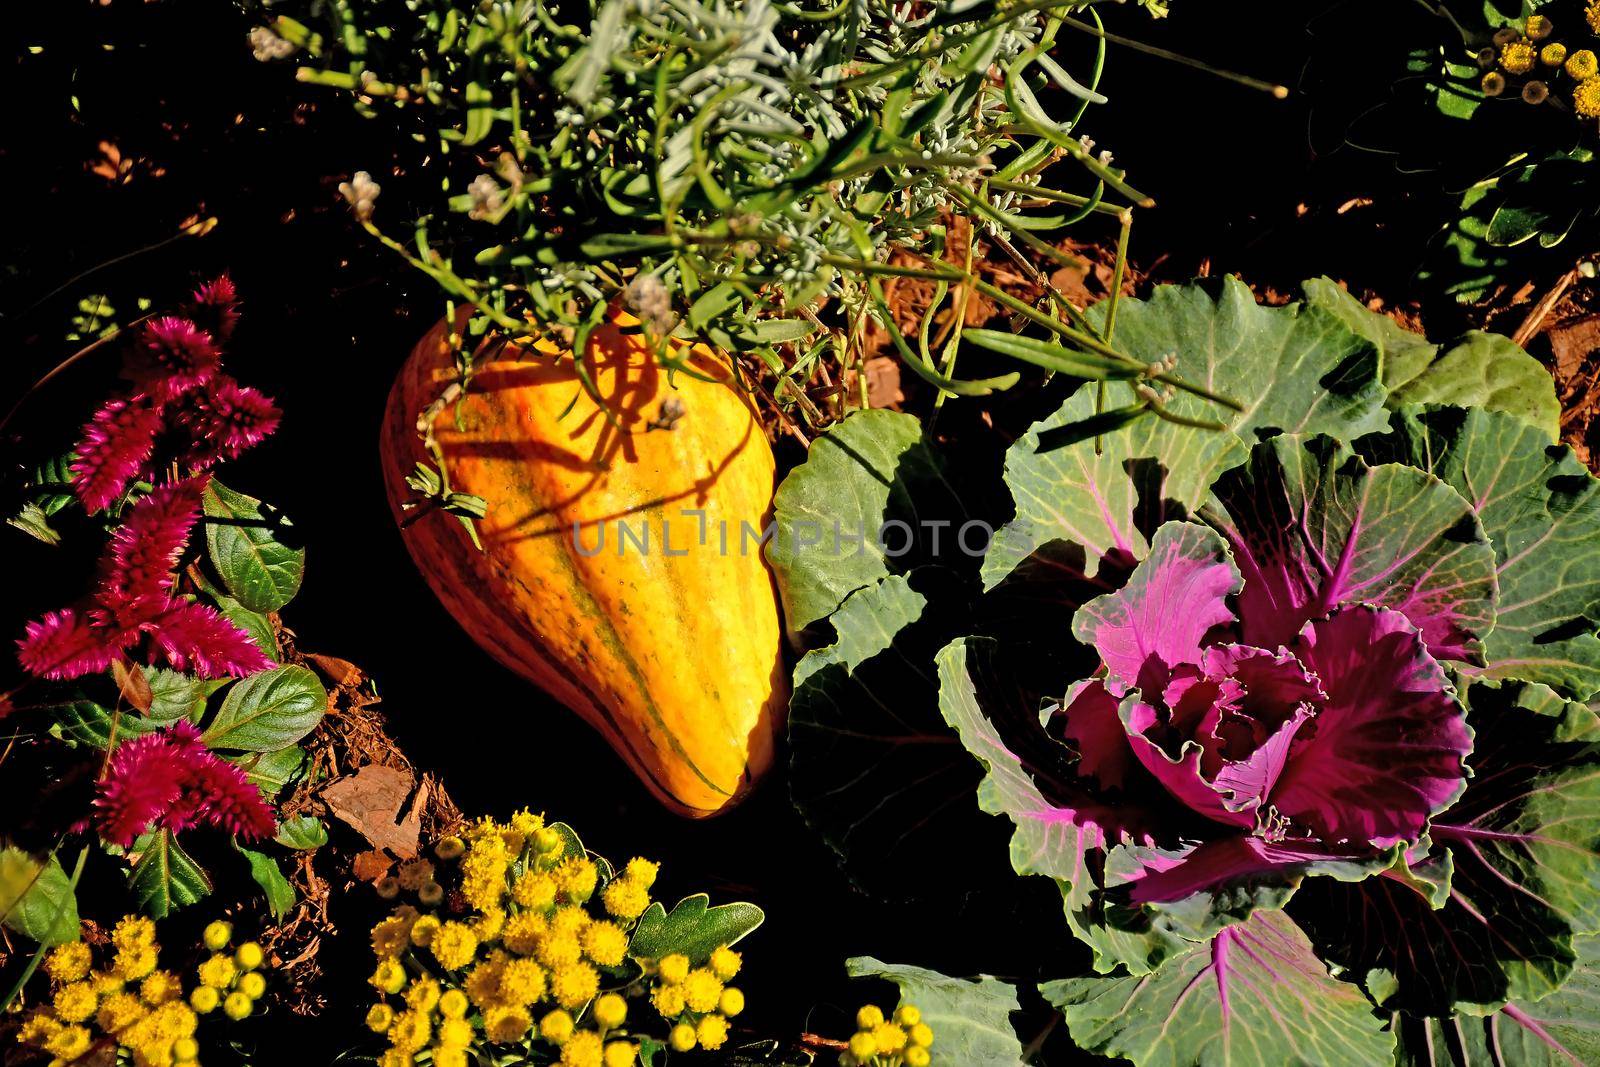 autumnal decorated garden with flowers and squash